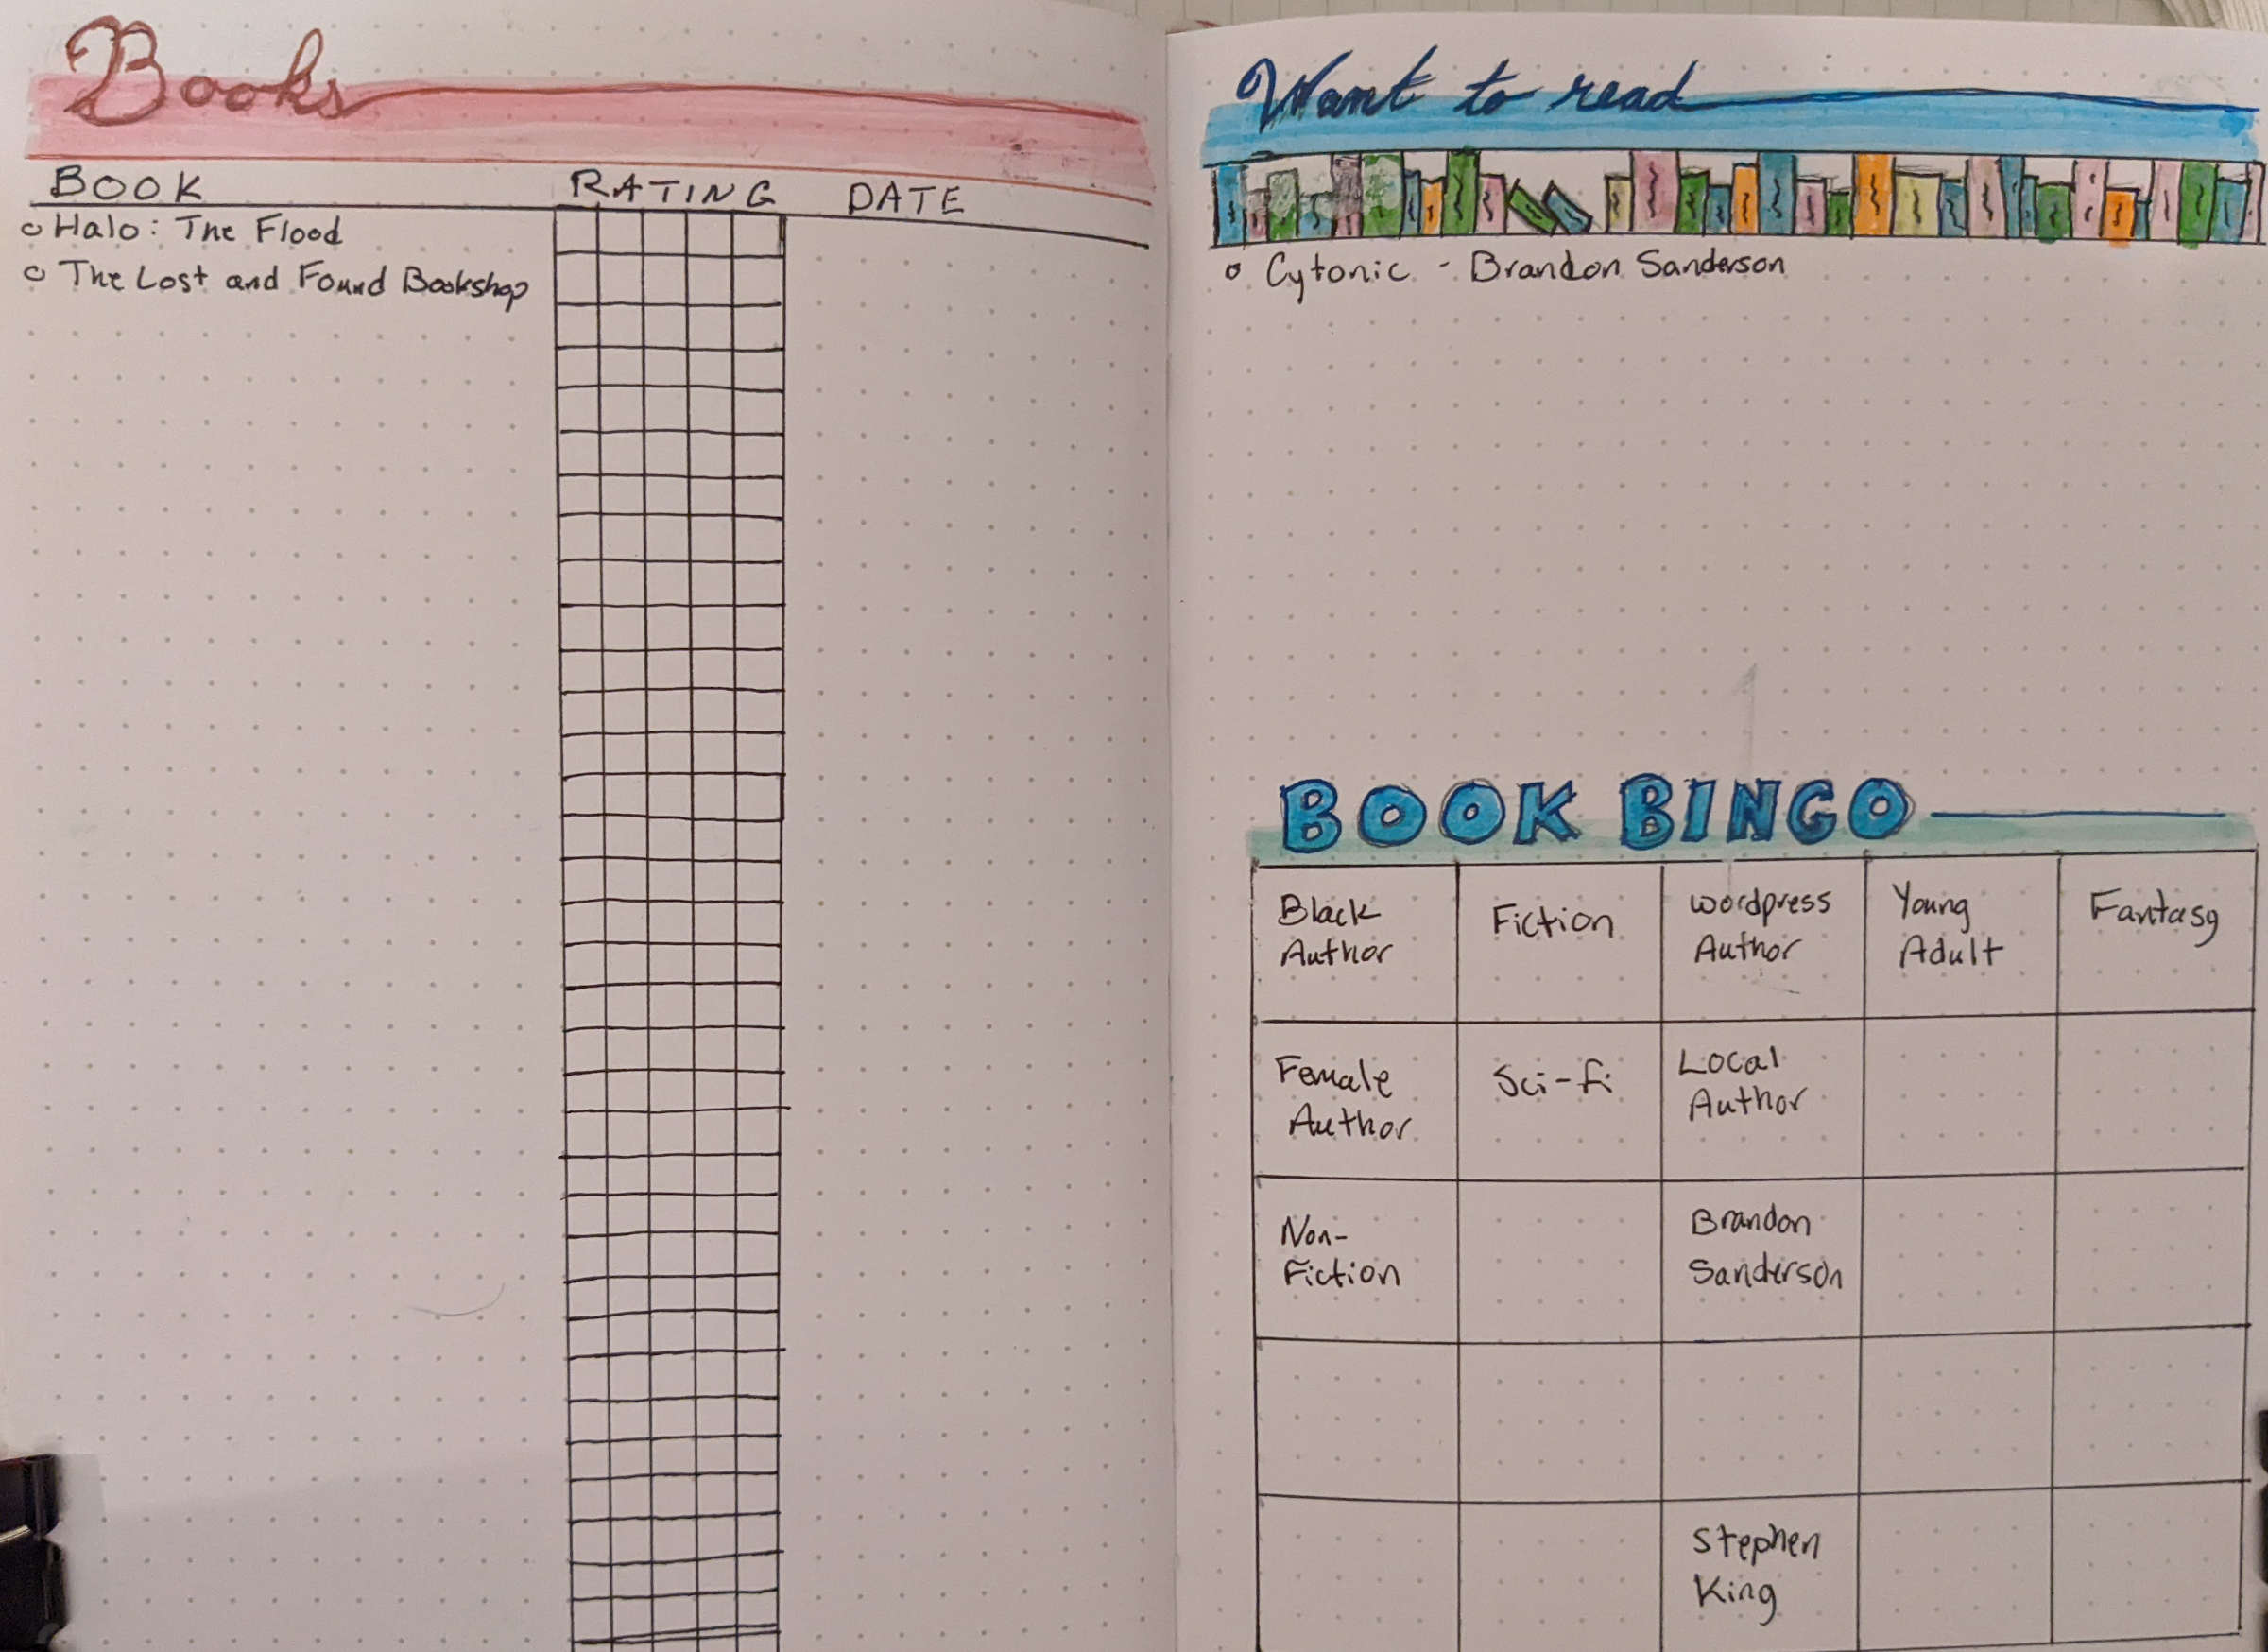 Two-page bullet journal spread. On the left is a “books read” section.  On the right is a “want to read” section and “book bingo” card.